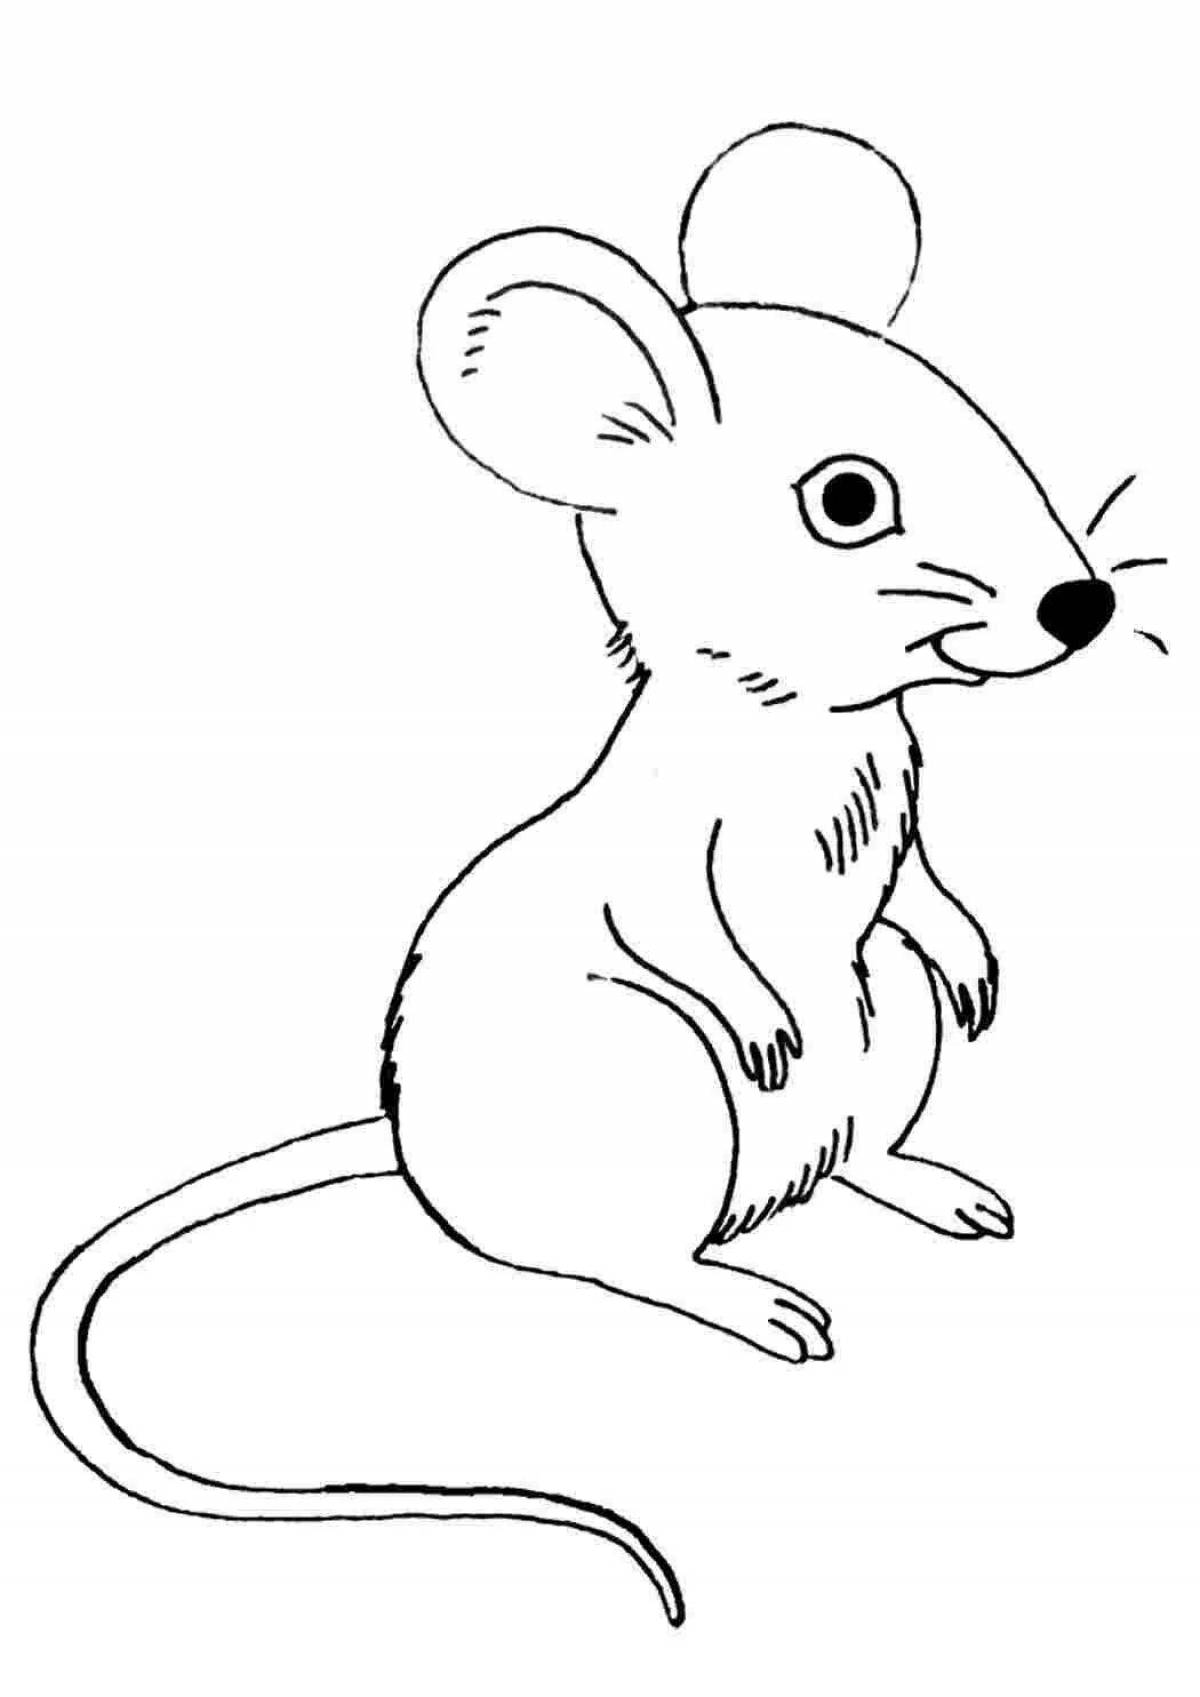 Cute mouse coloring for kids